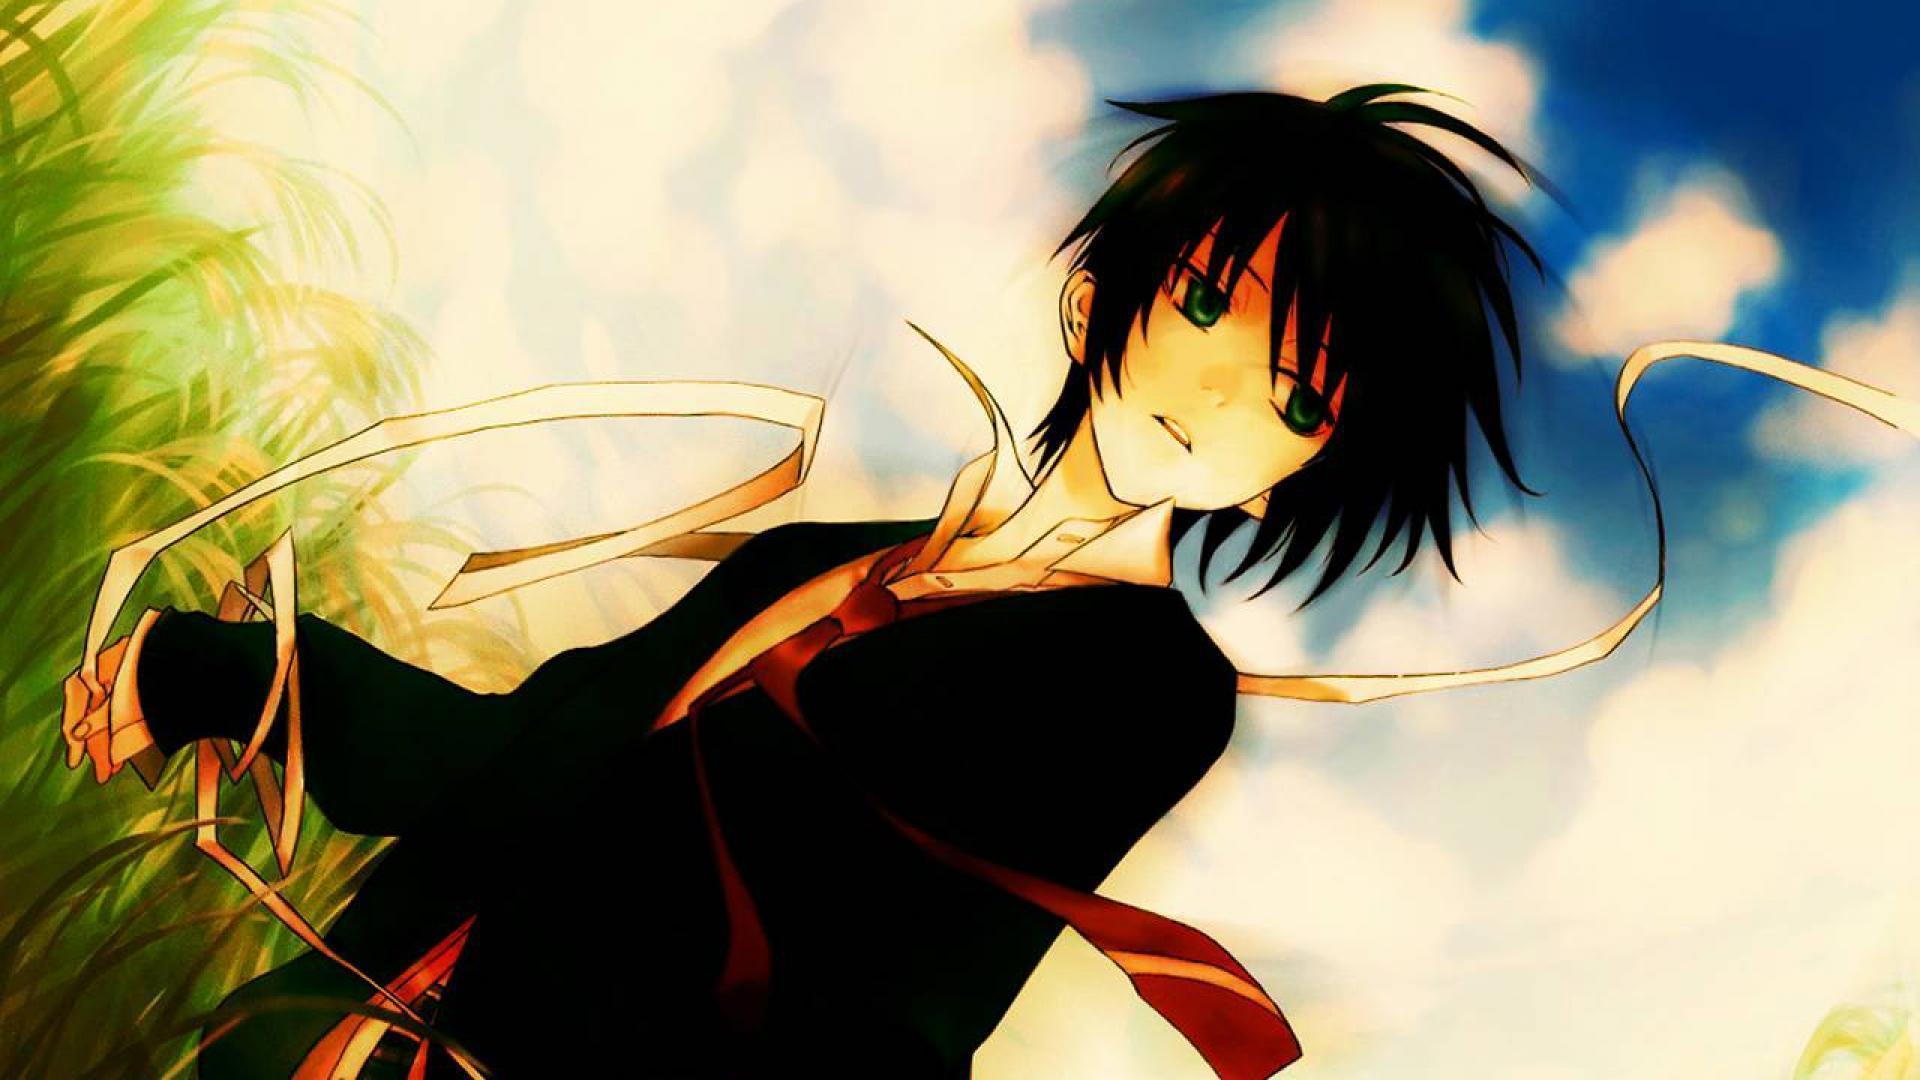 Cute Anime Boy With Black Hair HD Wallpapers Cute Wallpapers